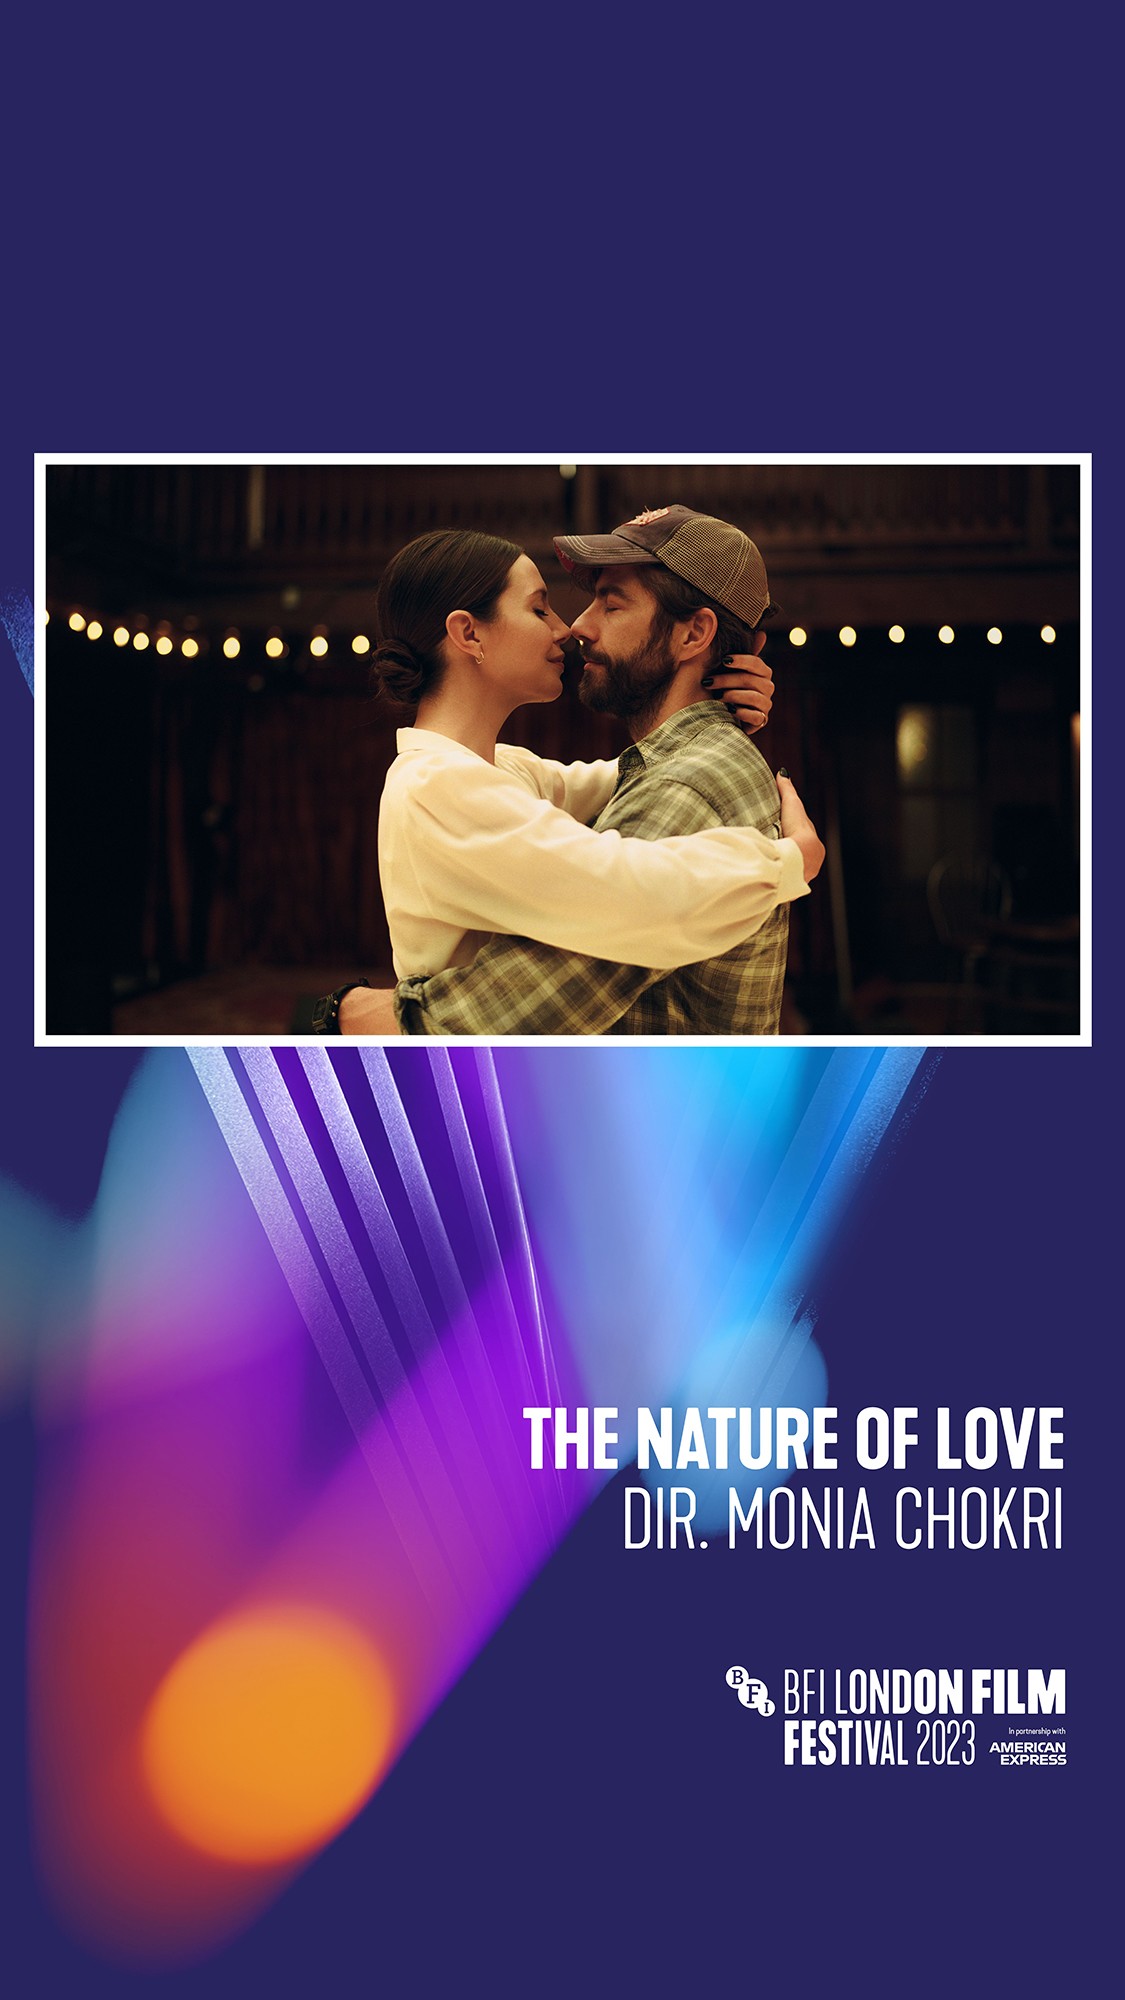 THE NATURE OF LOVE